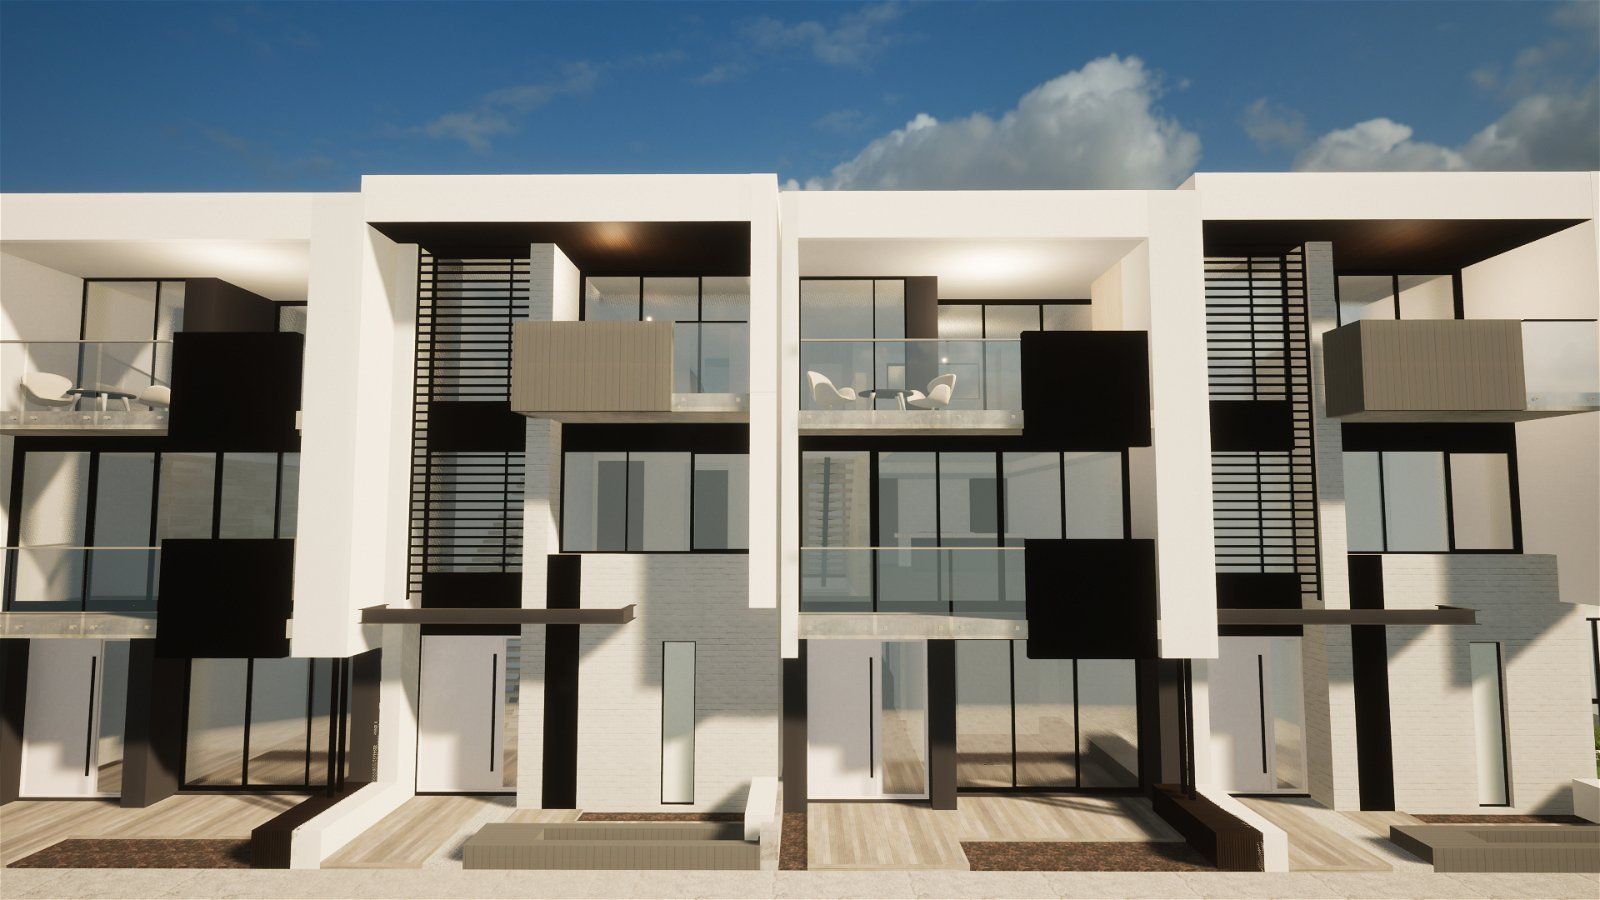 3 bedrooms New House & Land in Reinforcement Parade NORTH COOGEE WA, 6163